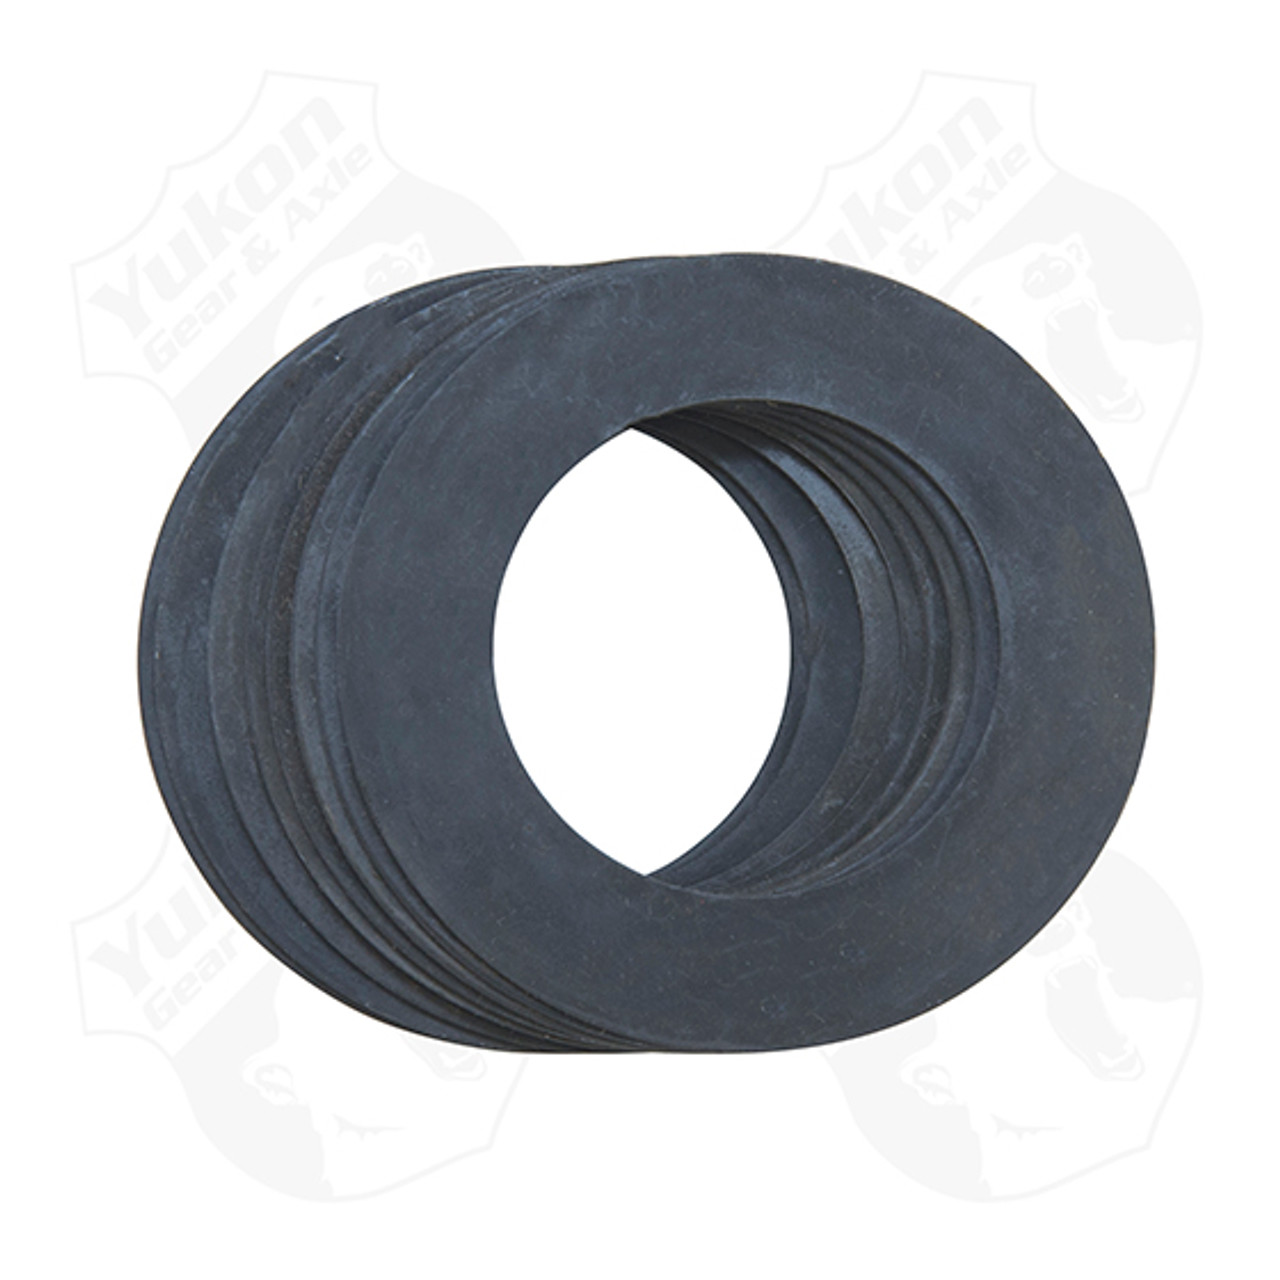 Side Gear and Thrust Washer for 7.25" Chrysler.